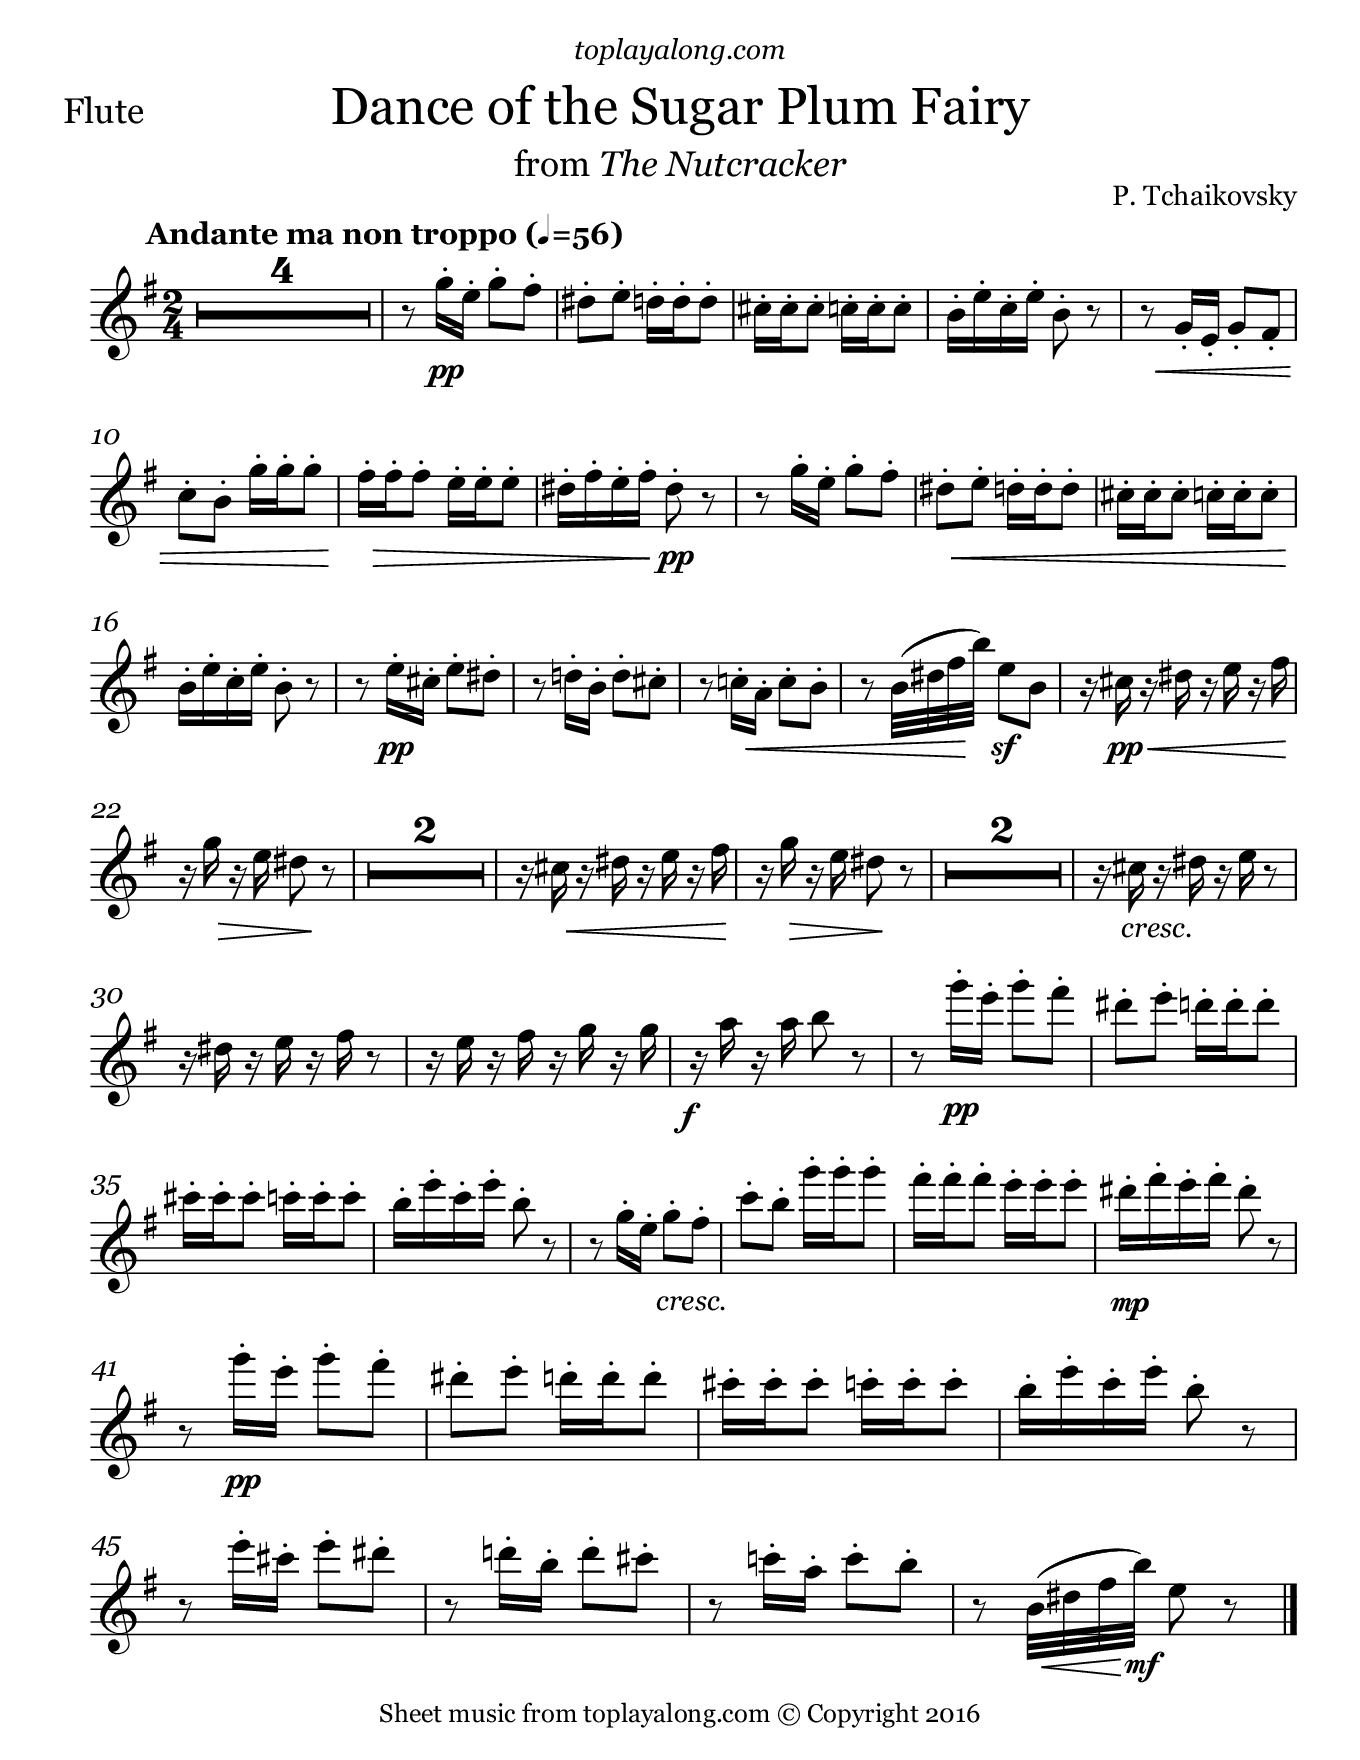 Free Flute Sheet Music For Dance Of The Sugar Plum Fairy - Free Printable Flute Sheet Music